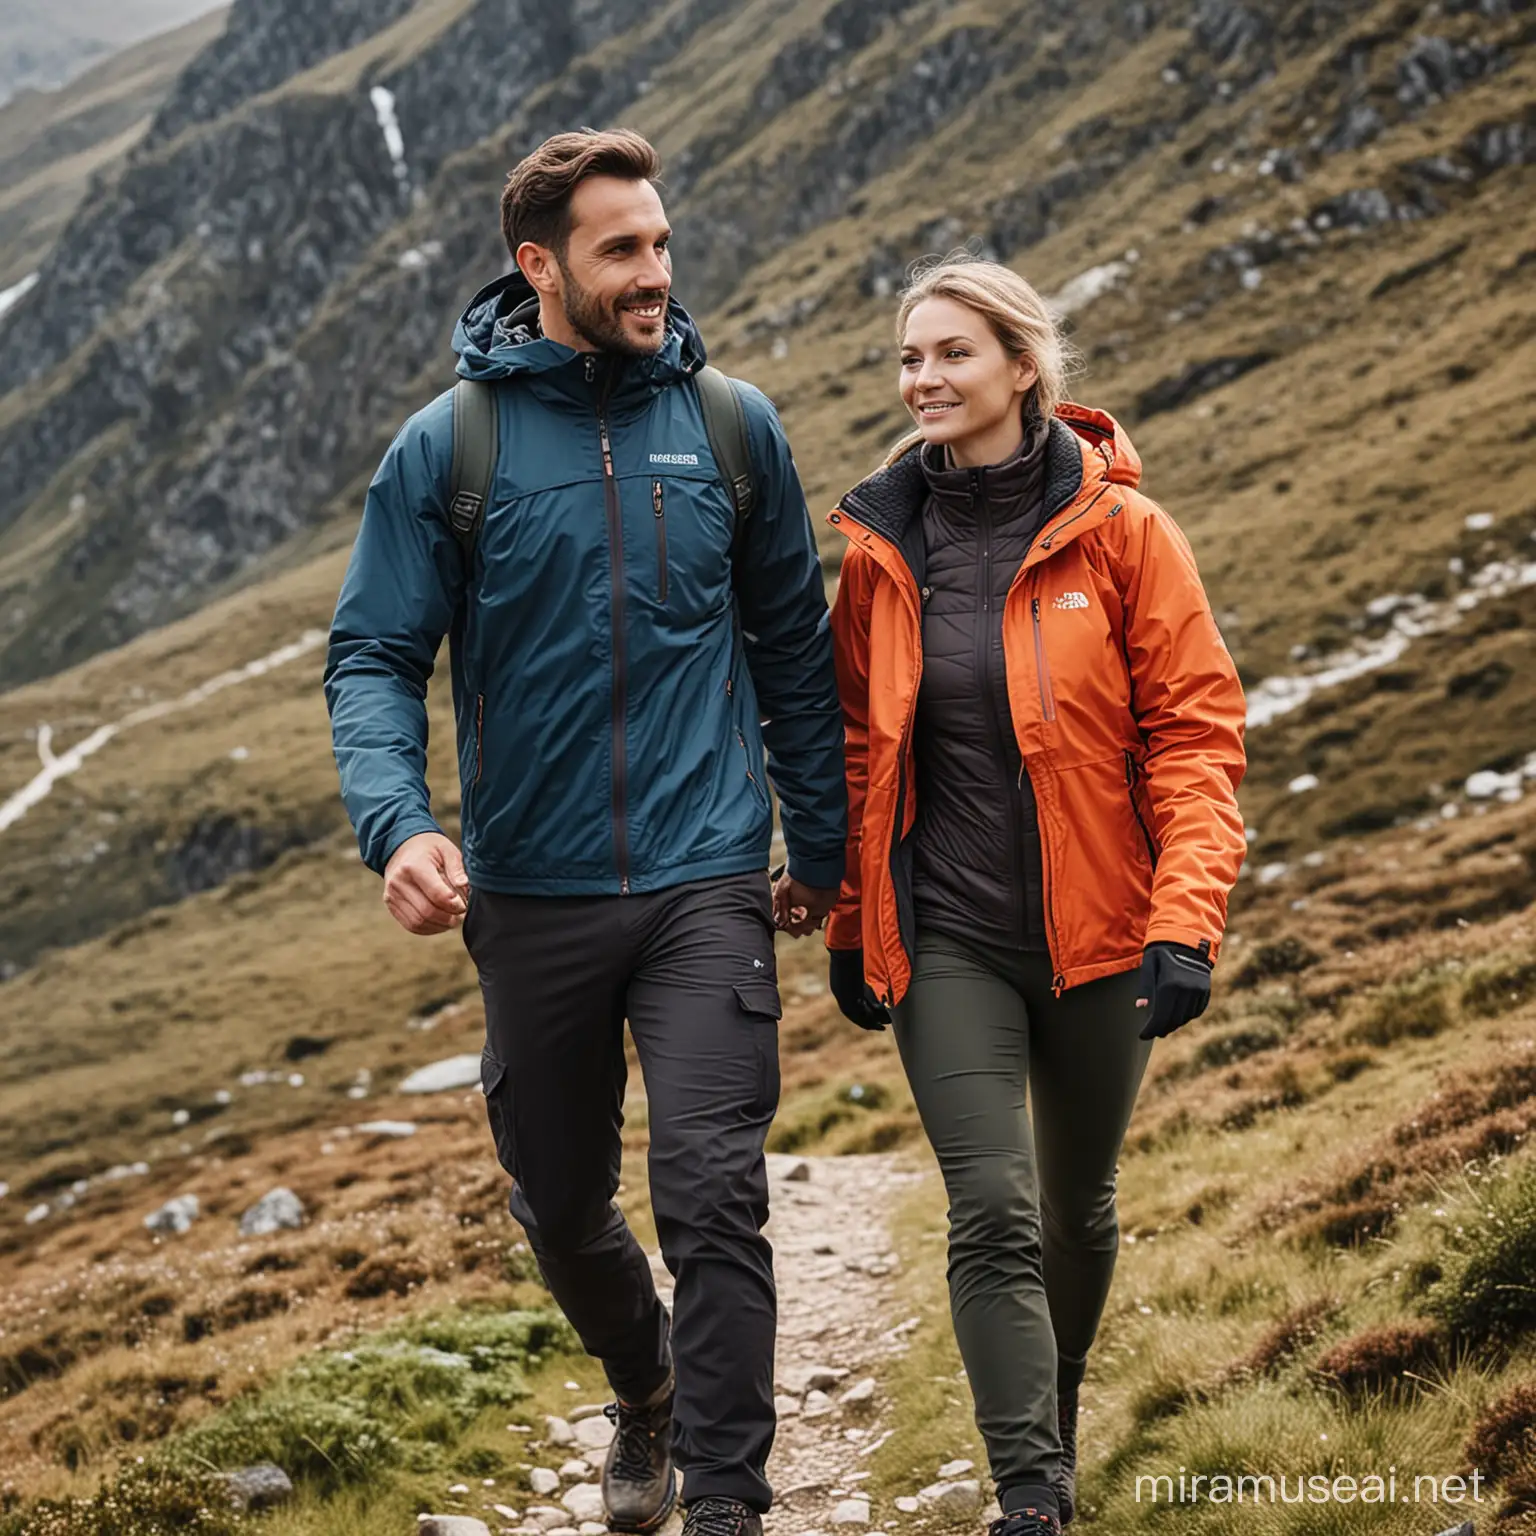 Man and woman hiking in great jackets
